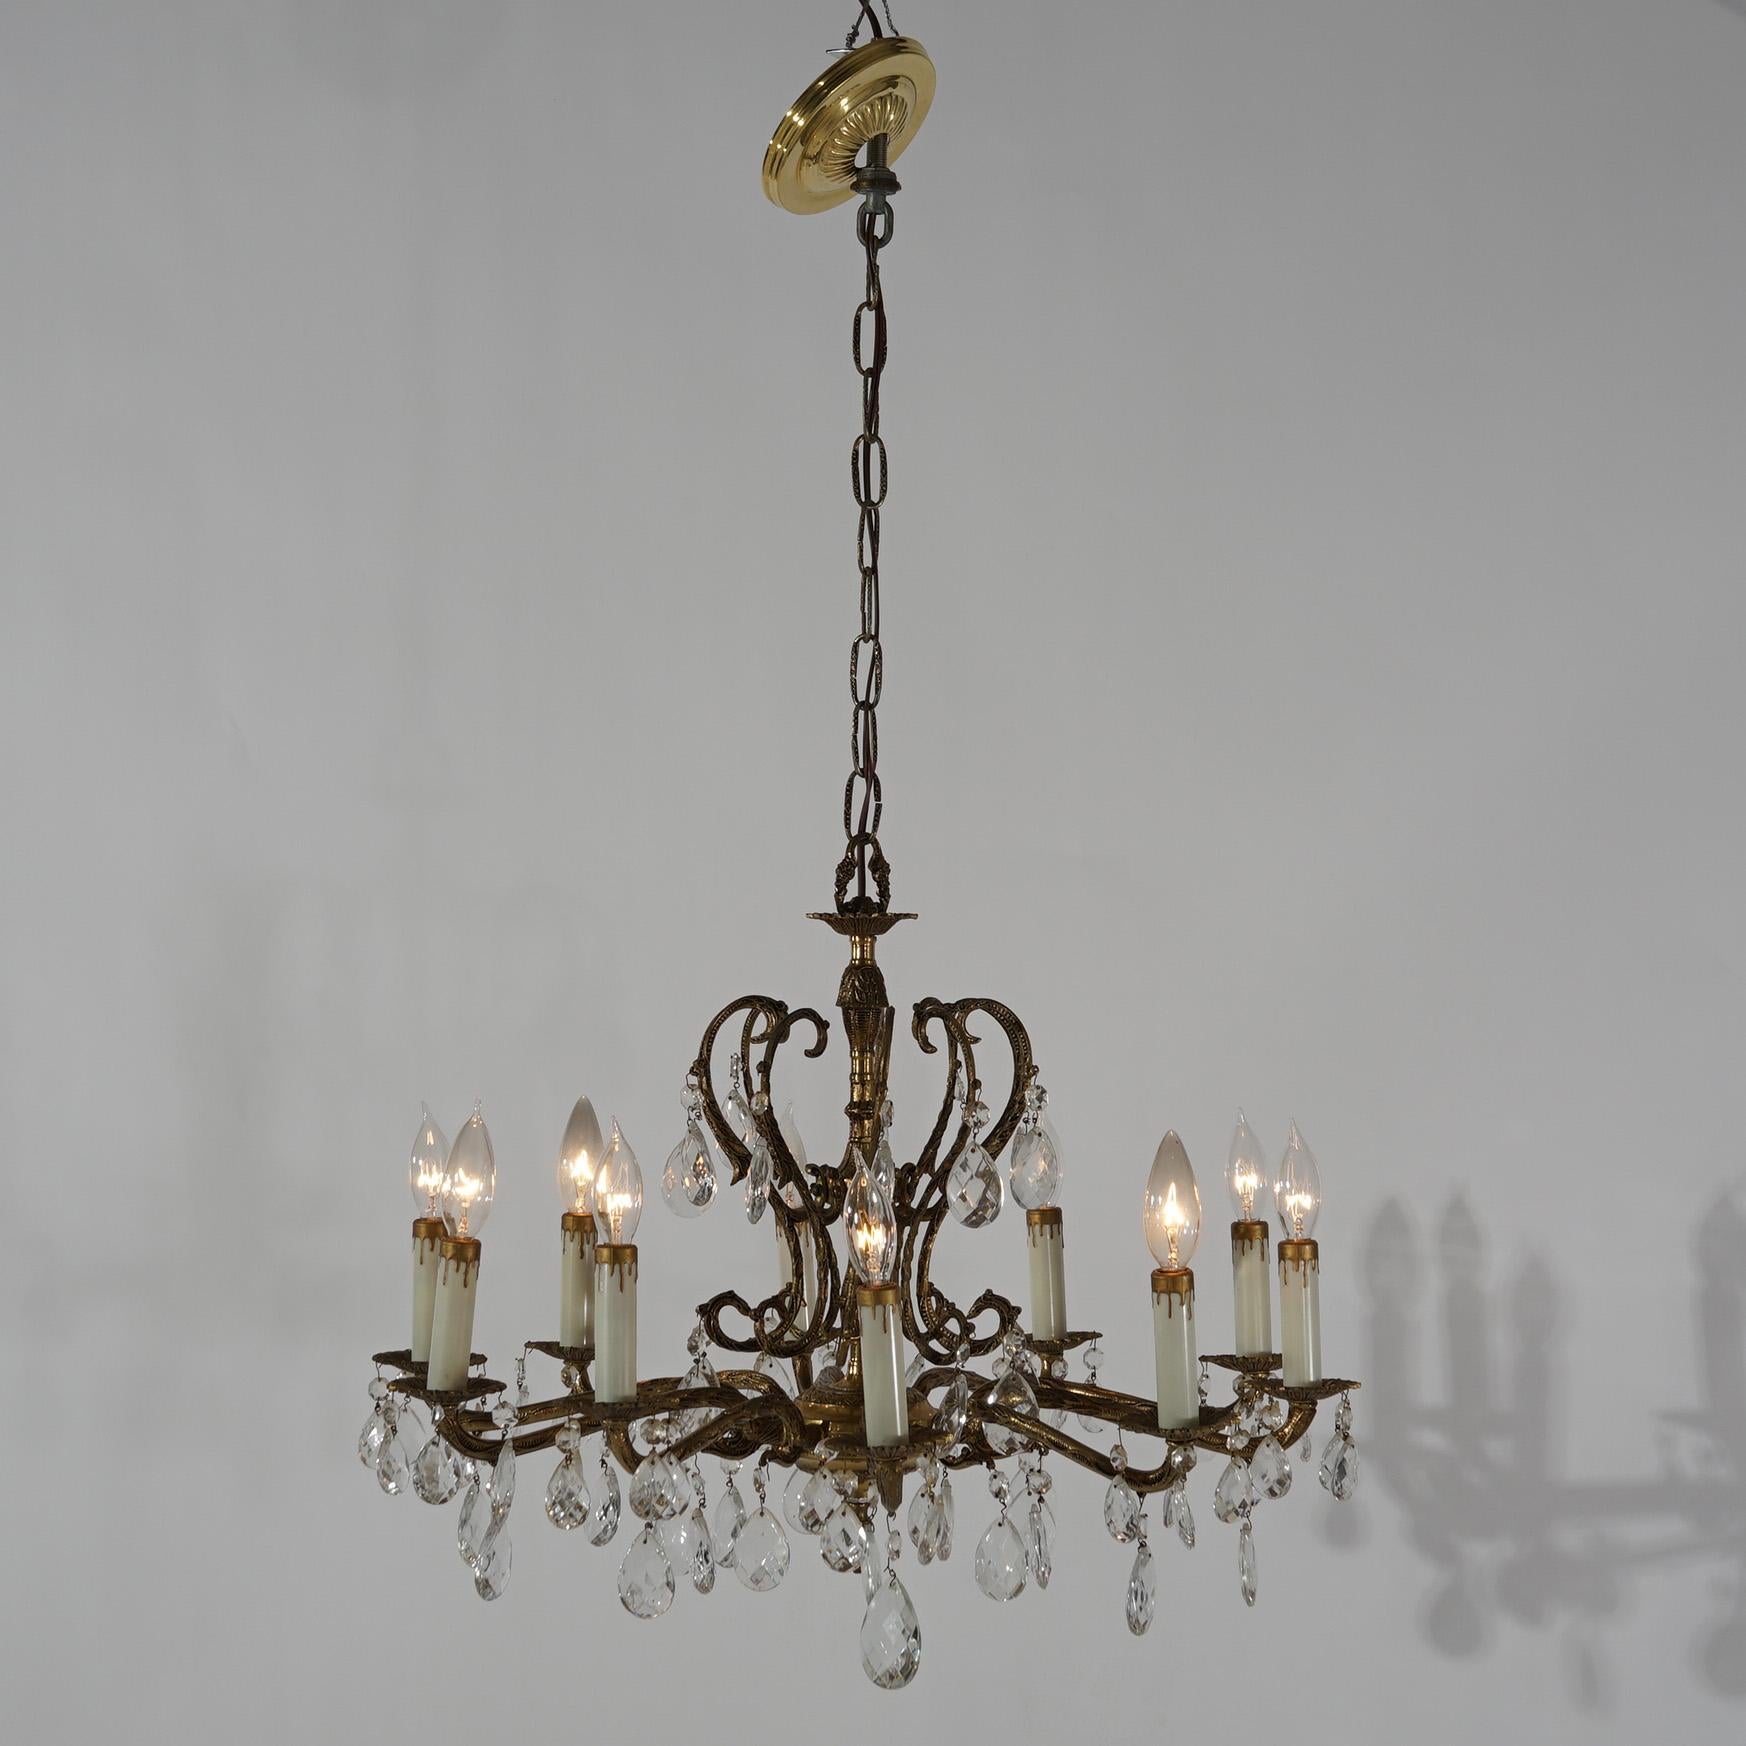 20th Century French Style Bronzed Metal & Crystal Ten Light Chandelier, circa 1940 For Sale